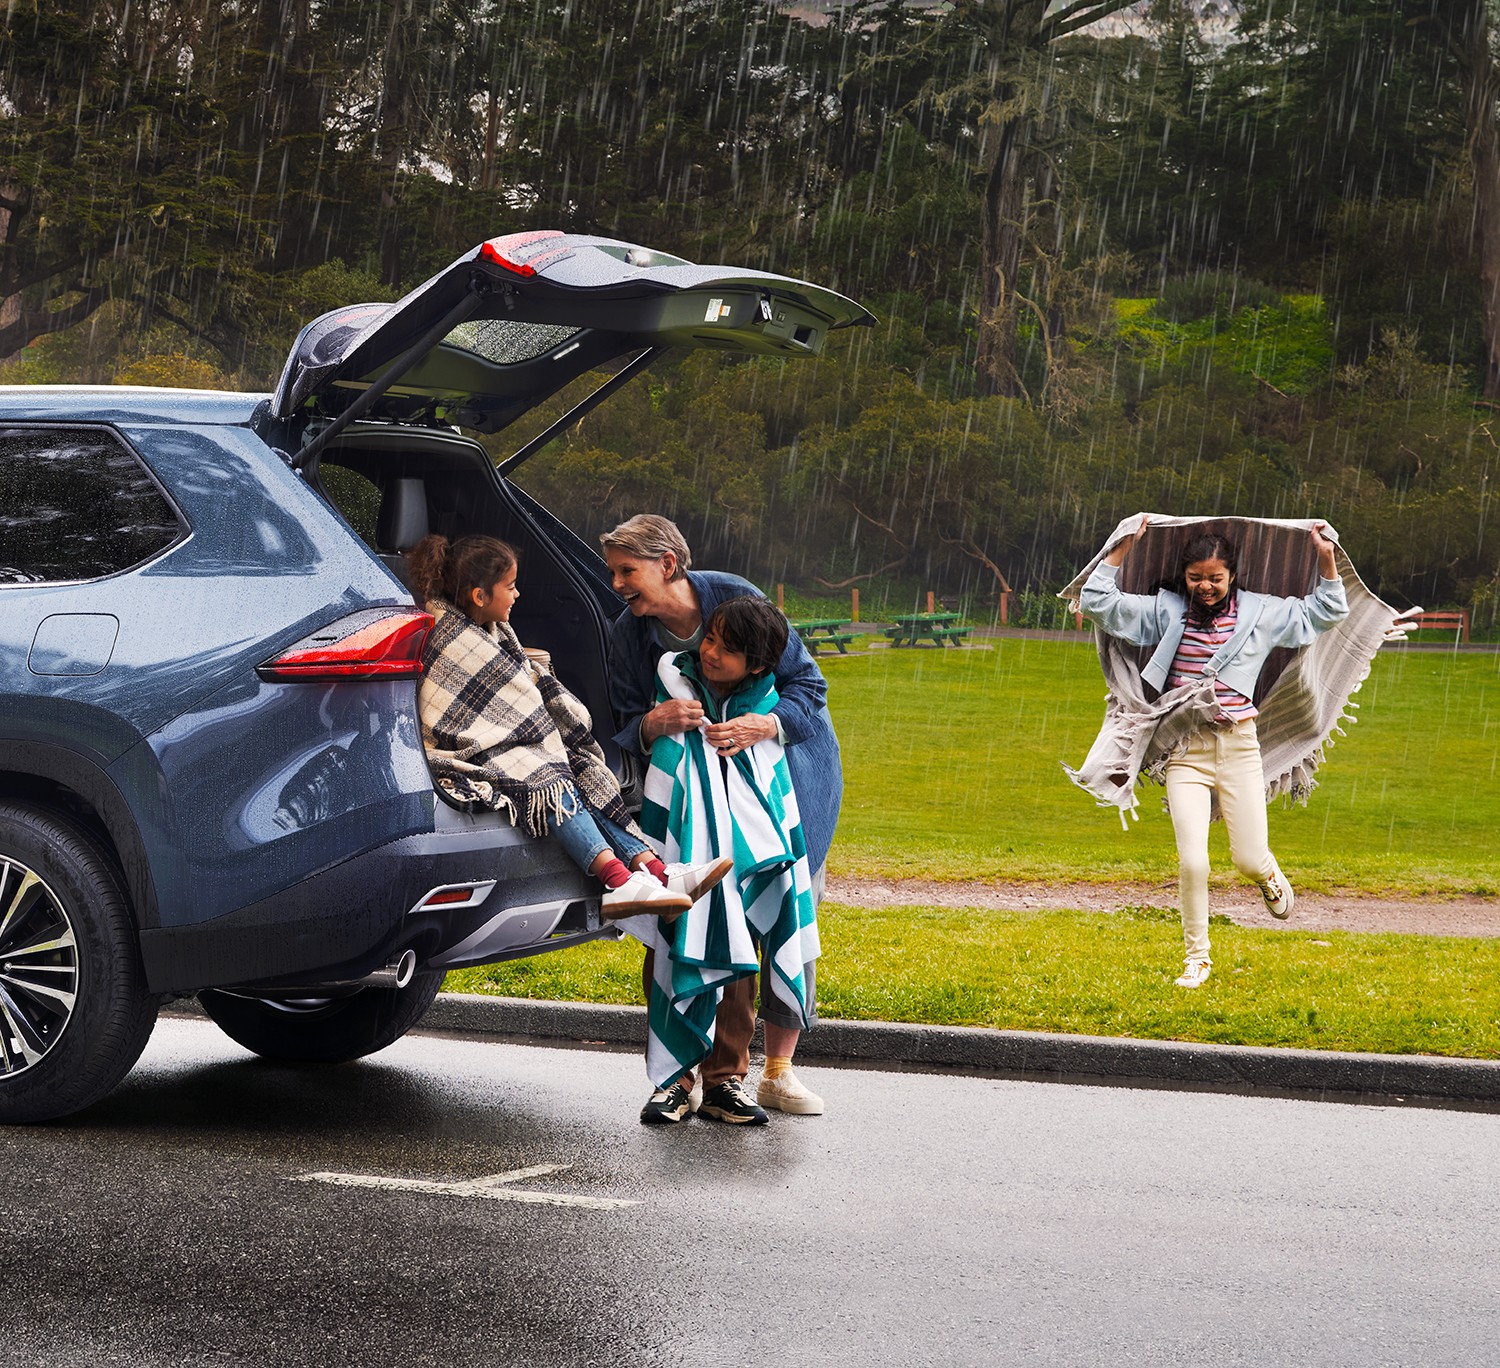 On a rainy day at the park, two kids sit at the back of their Toyota while their mom laughs and dries them off with towels. In the background, a girl runs towards the car holding a towel over her head to protect her from the rain.